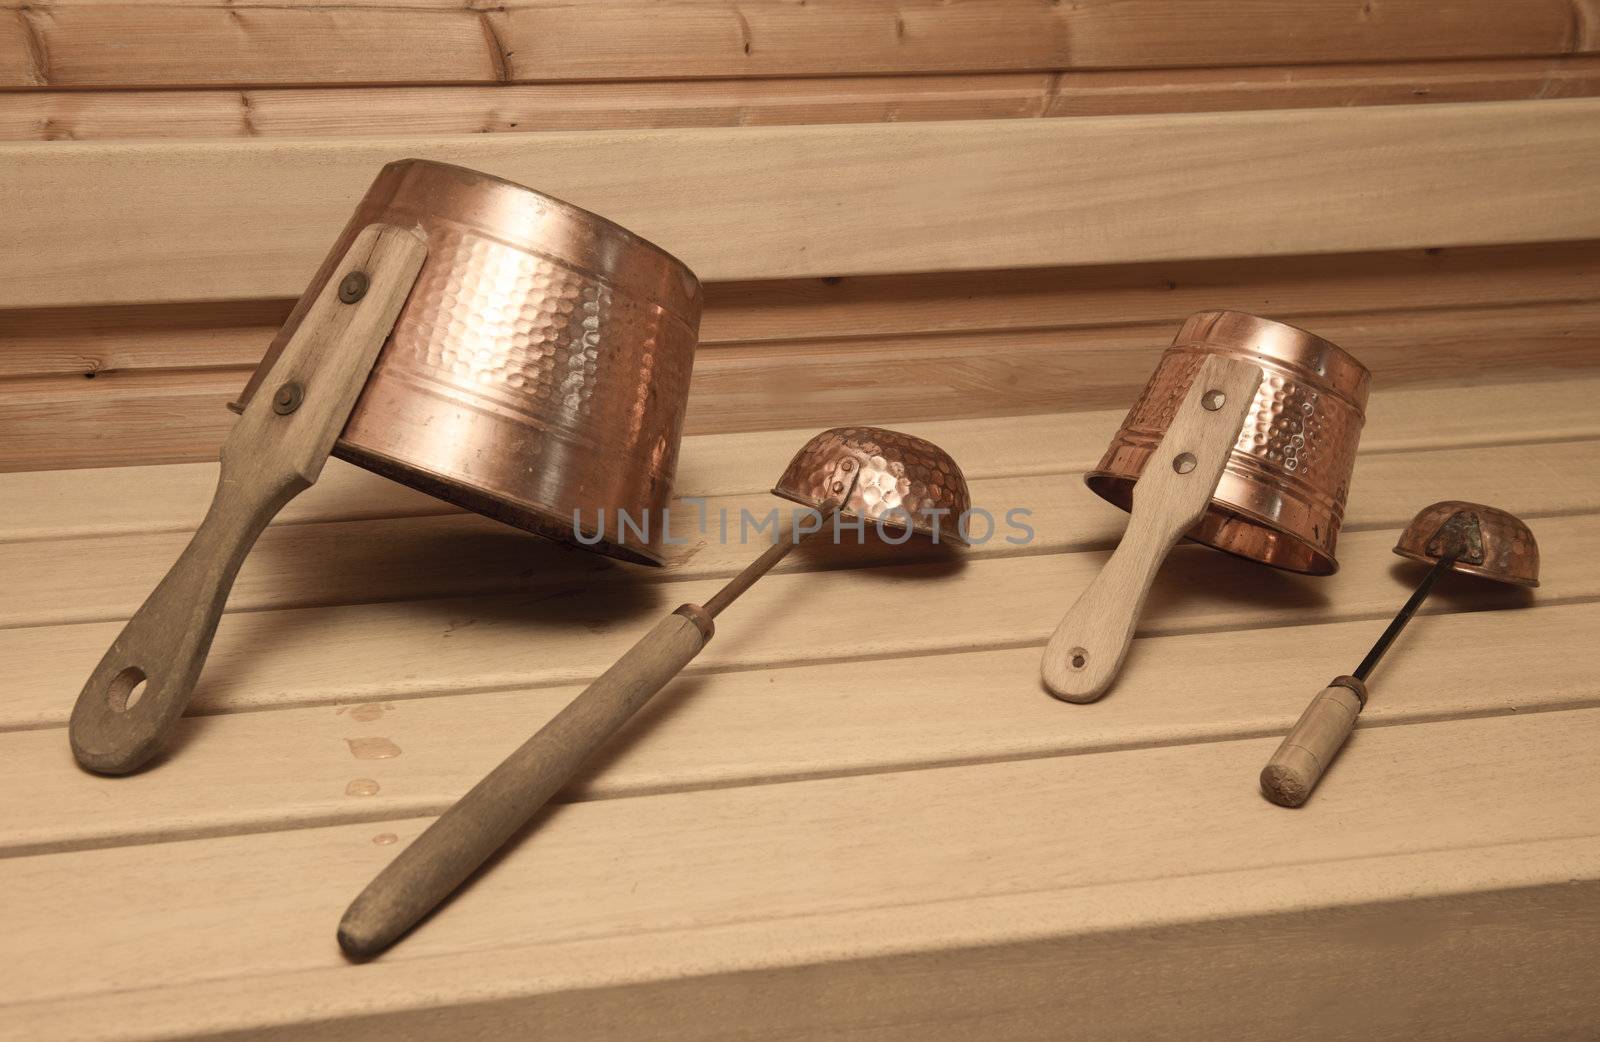 Two buckets for water with ladles in an interior of the Finnish sauna